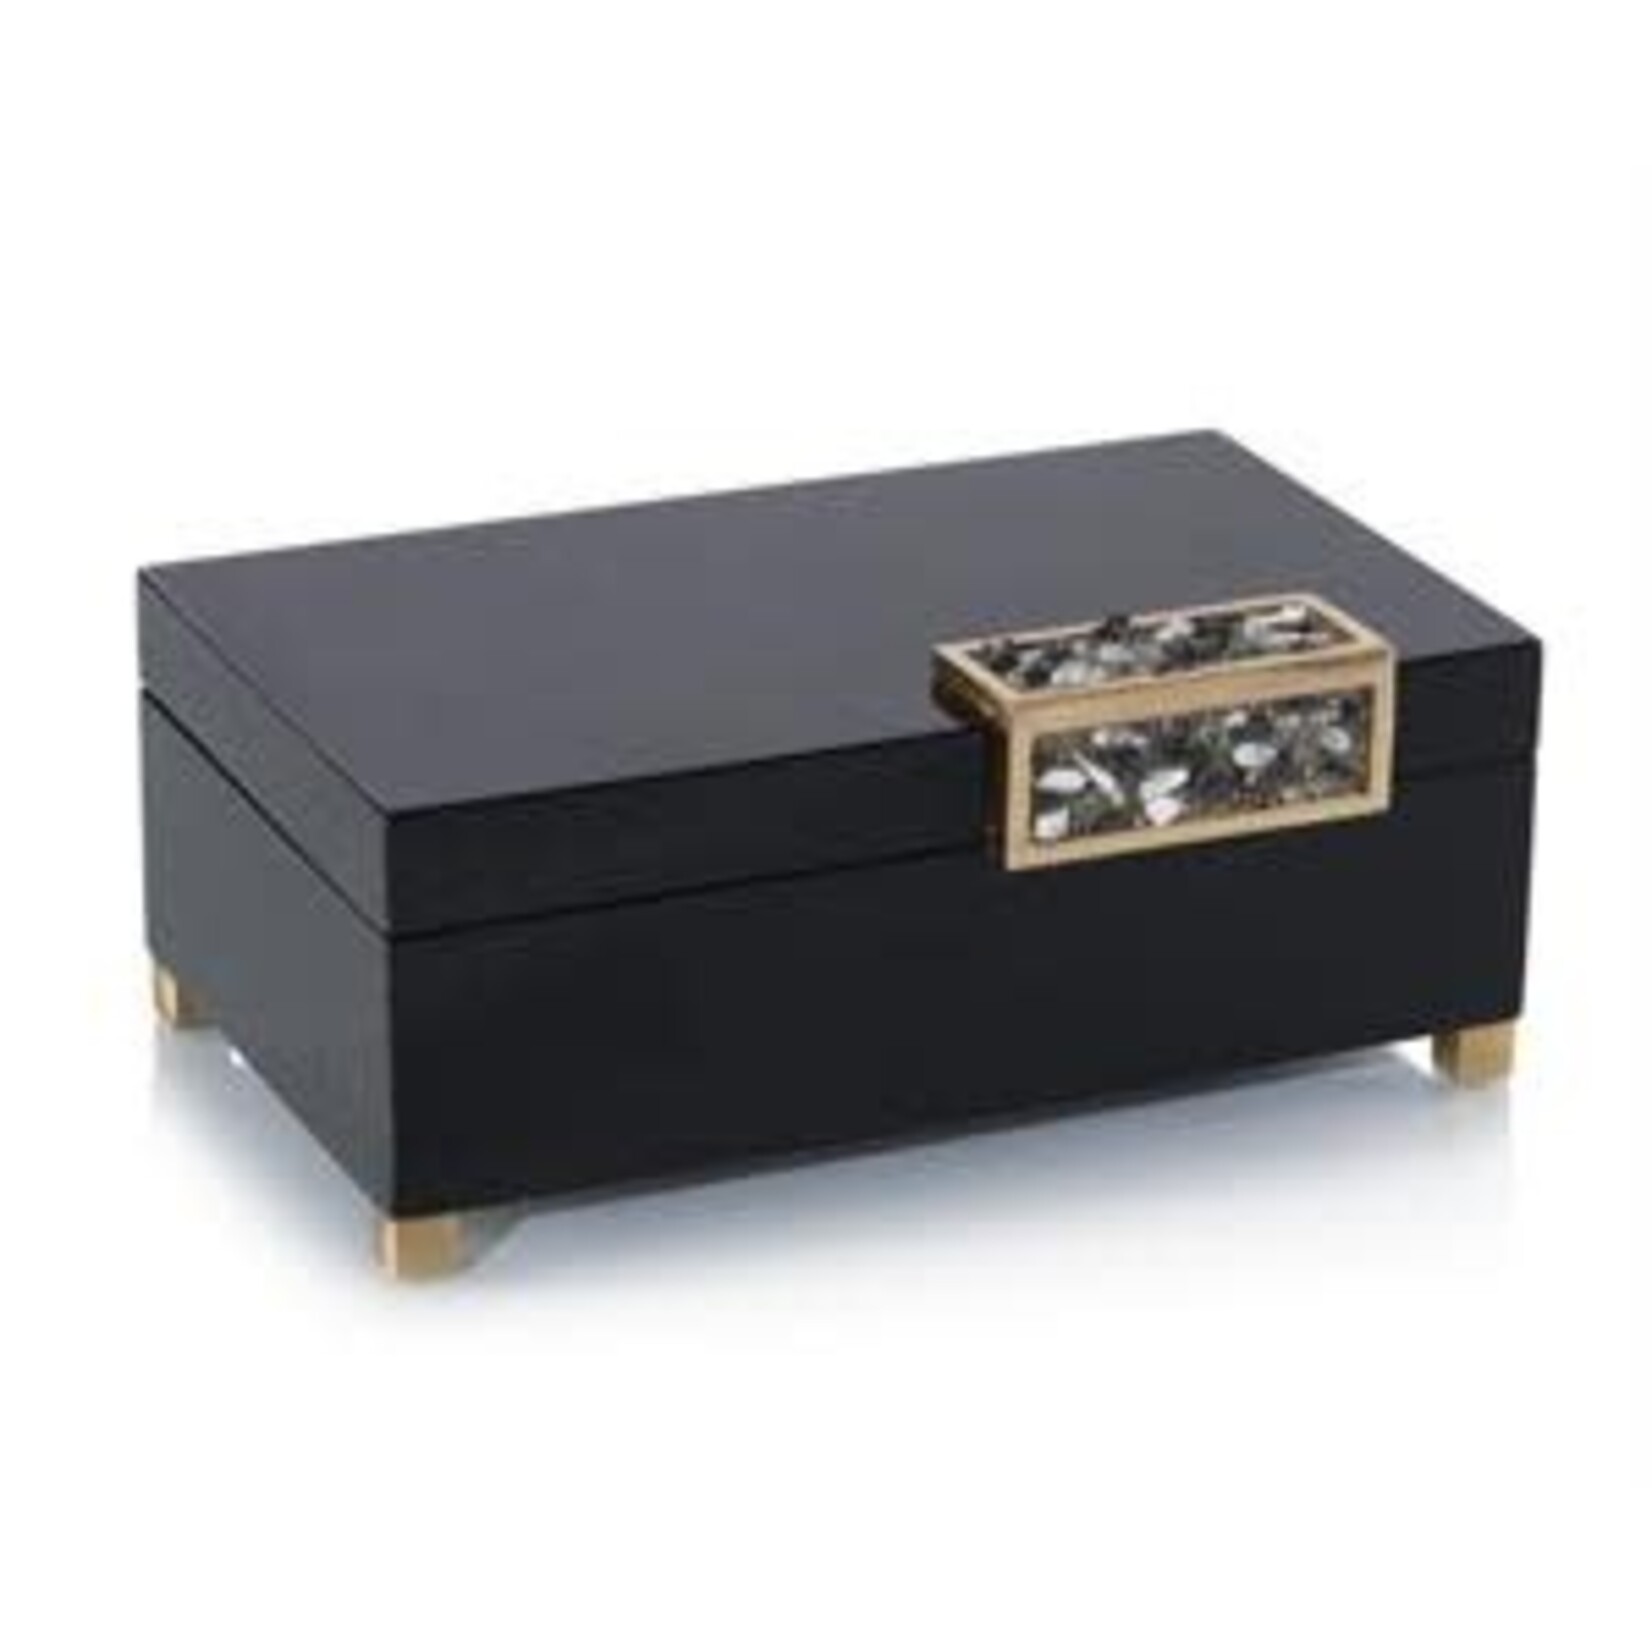 The John Richard Collection, LLC Black Box with Silver Stone Accent